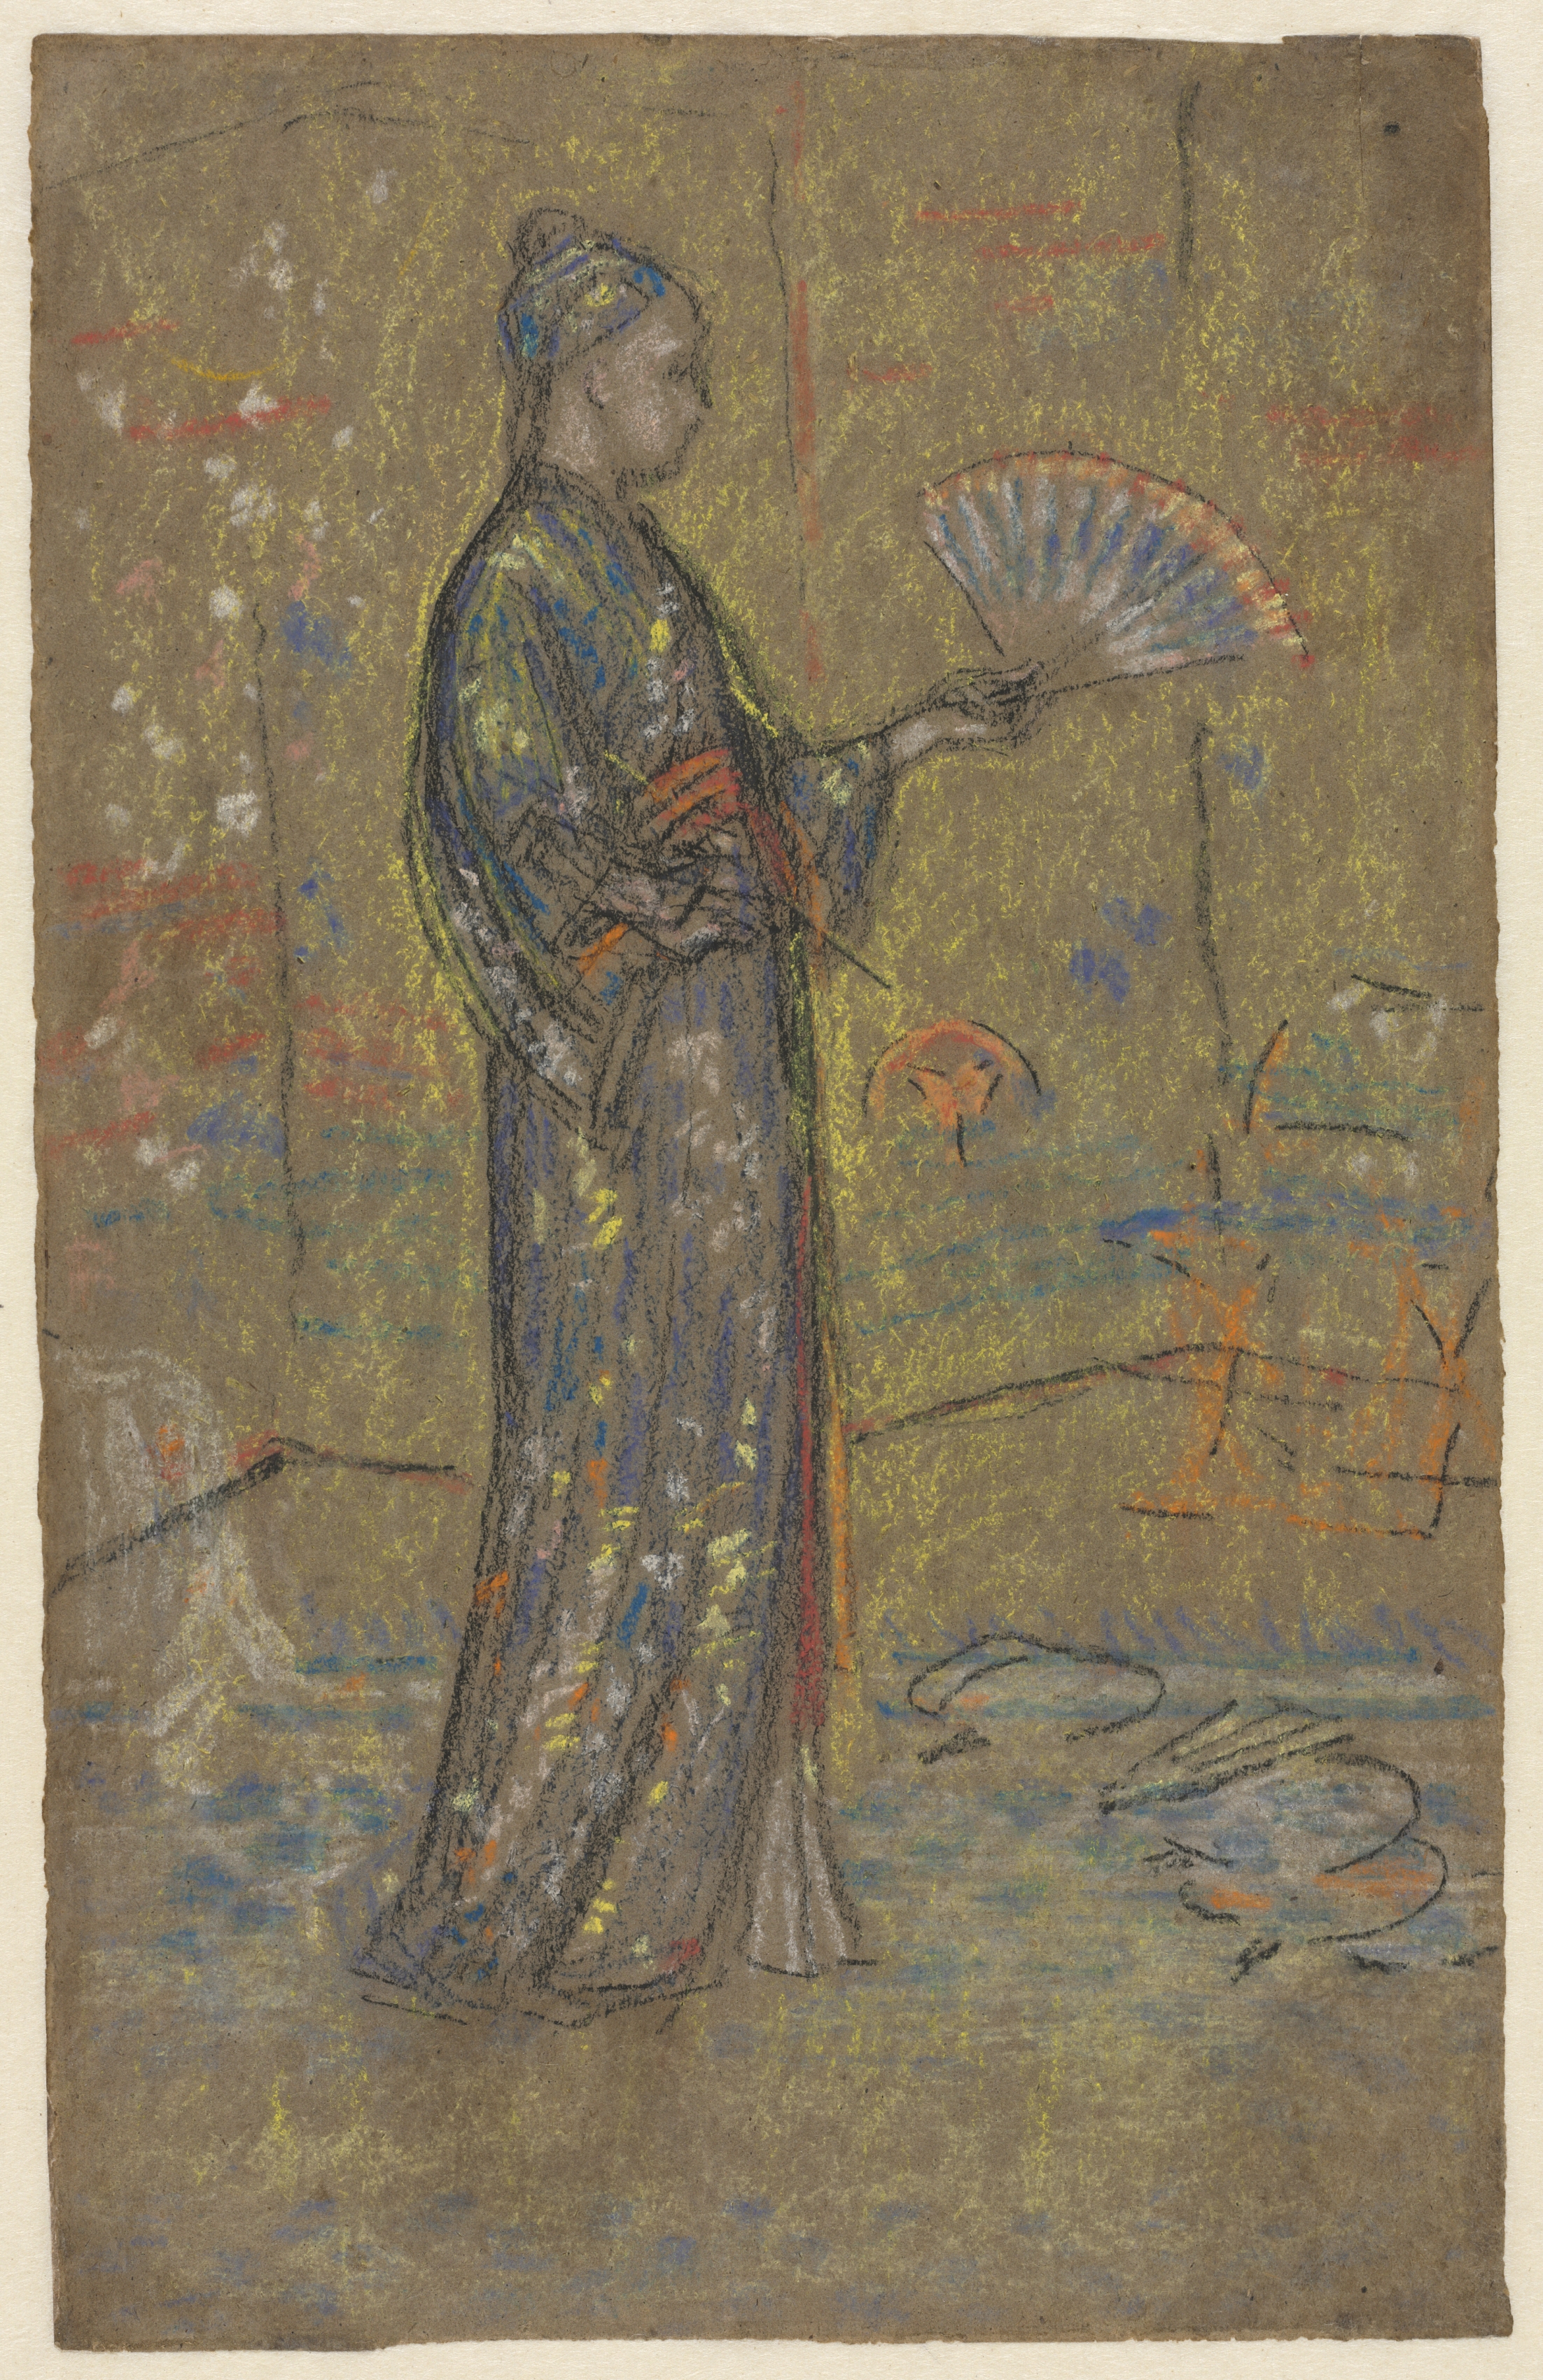 Japanese Woman Painting a Fan (recto)